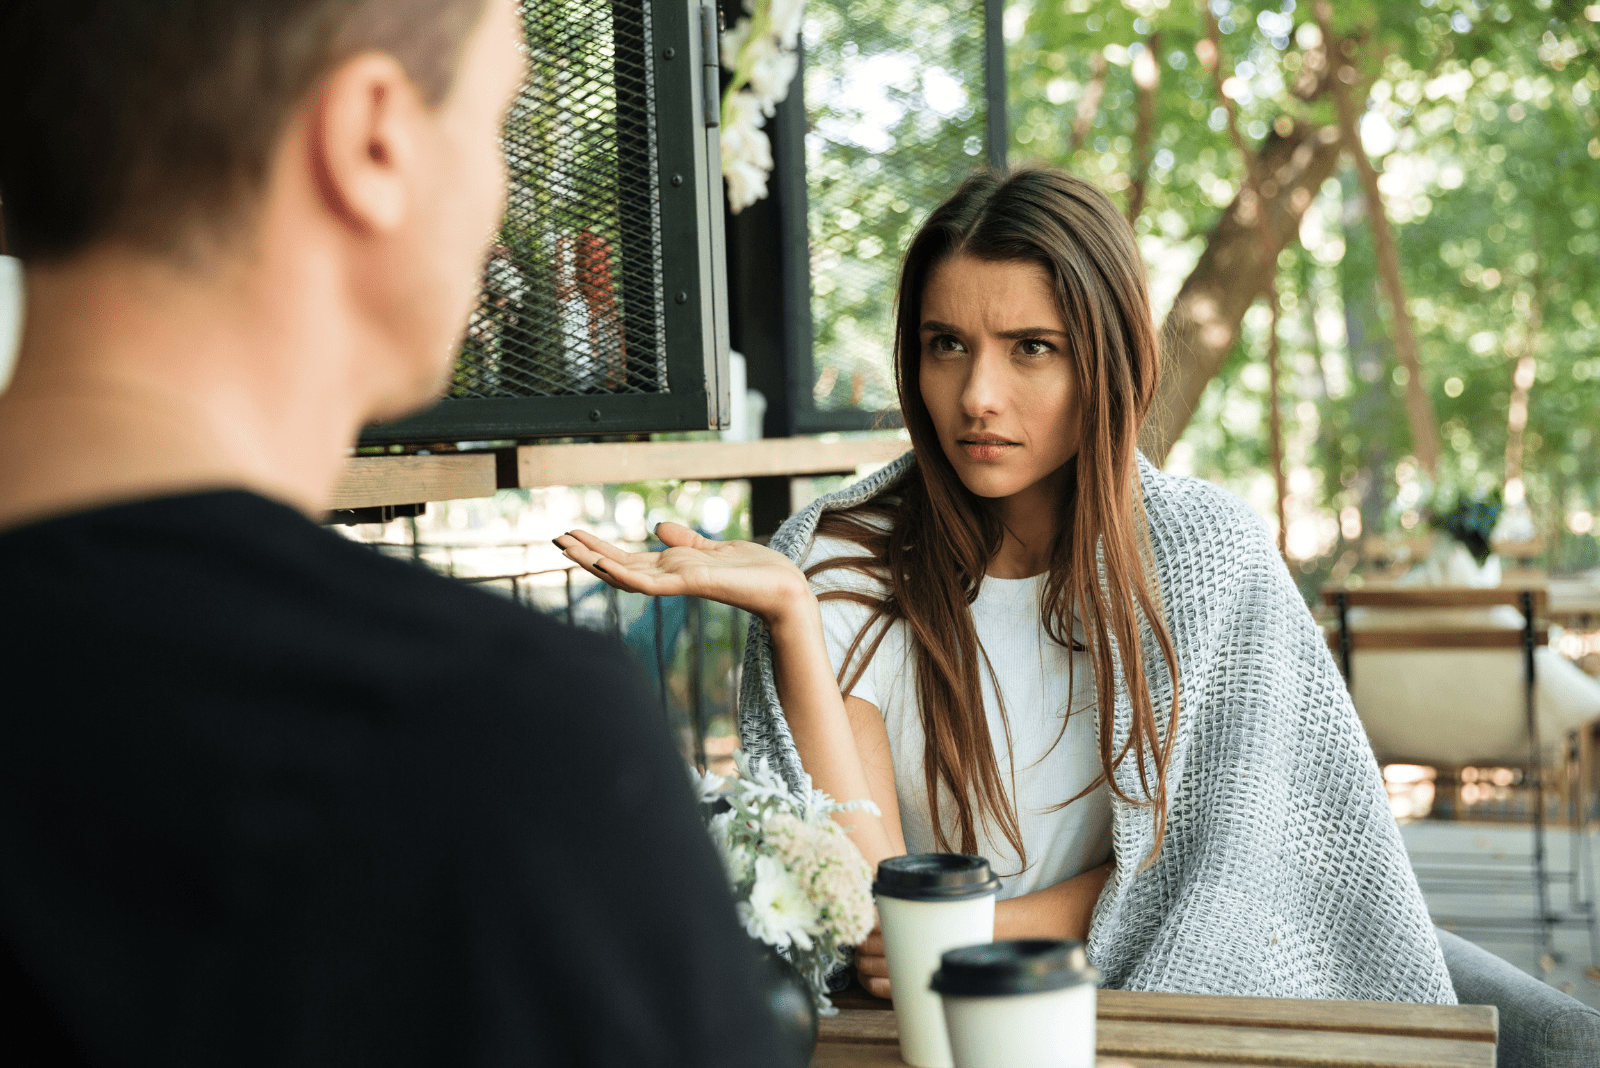 a disappointed woman with long brown hair is talking to a man